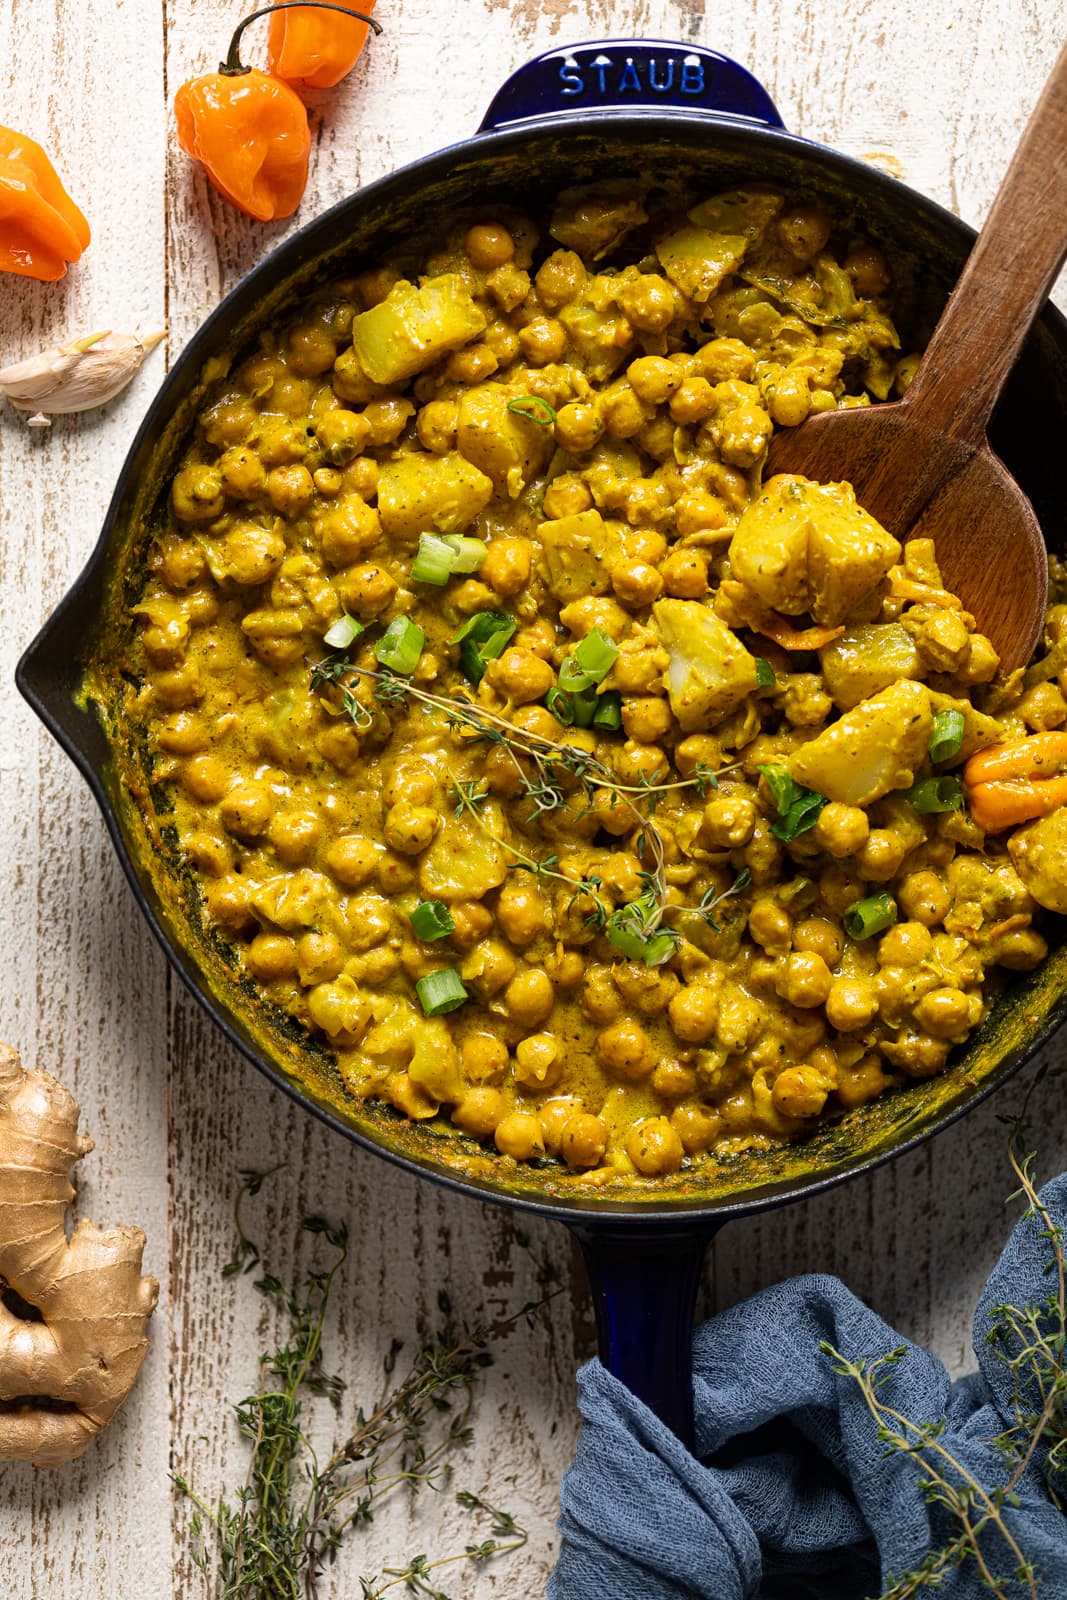 Wooden spoon stirring a skillet of Spicy Curry Chickpea and Potatoes